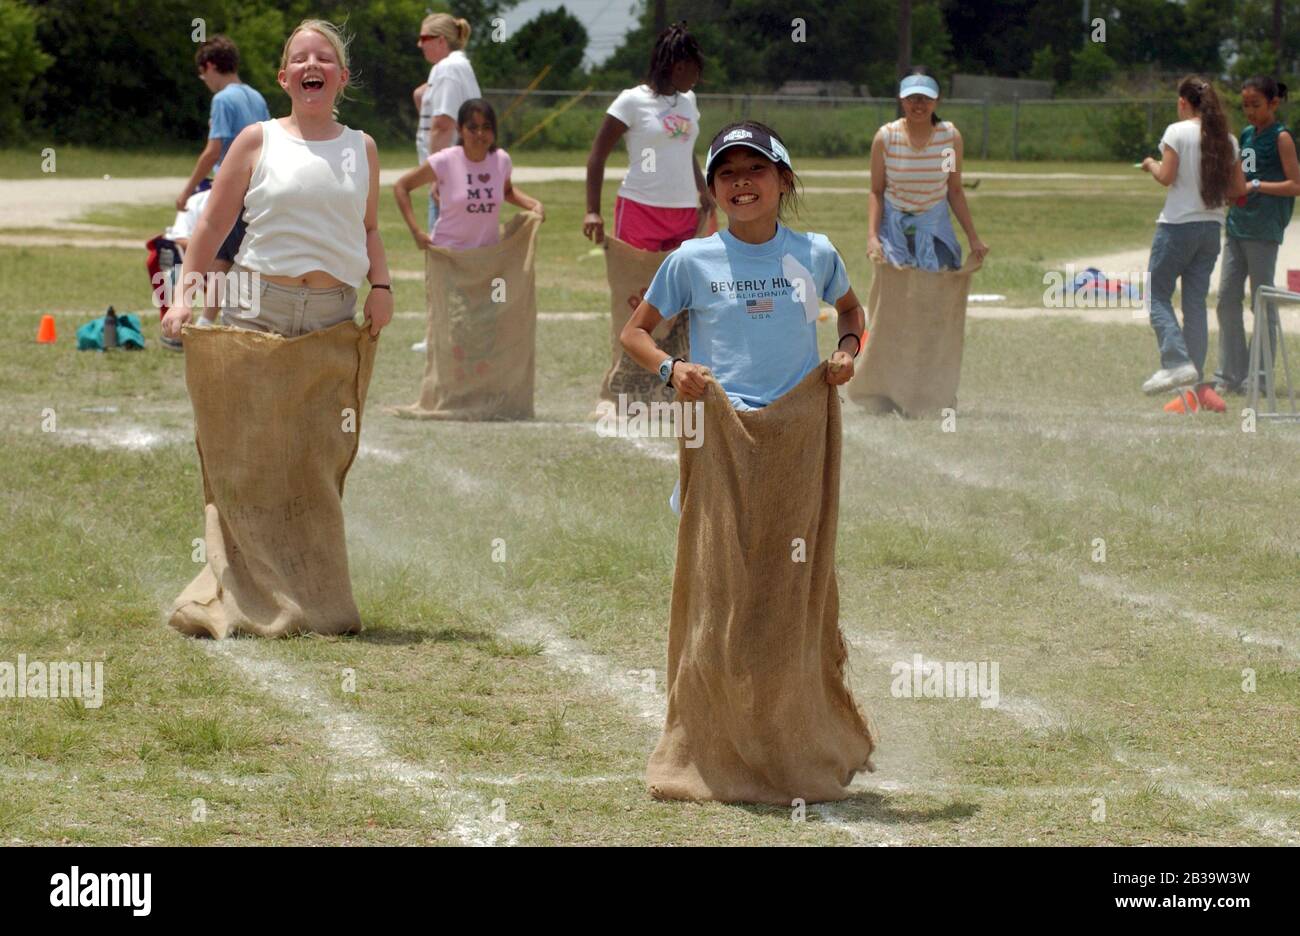 Austin Texas USA, circa 2004: Elementary school students compete in a sack race during the annual field day at Walnut Creek Elementary School. ©Bob Daemmrich Stock Photo